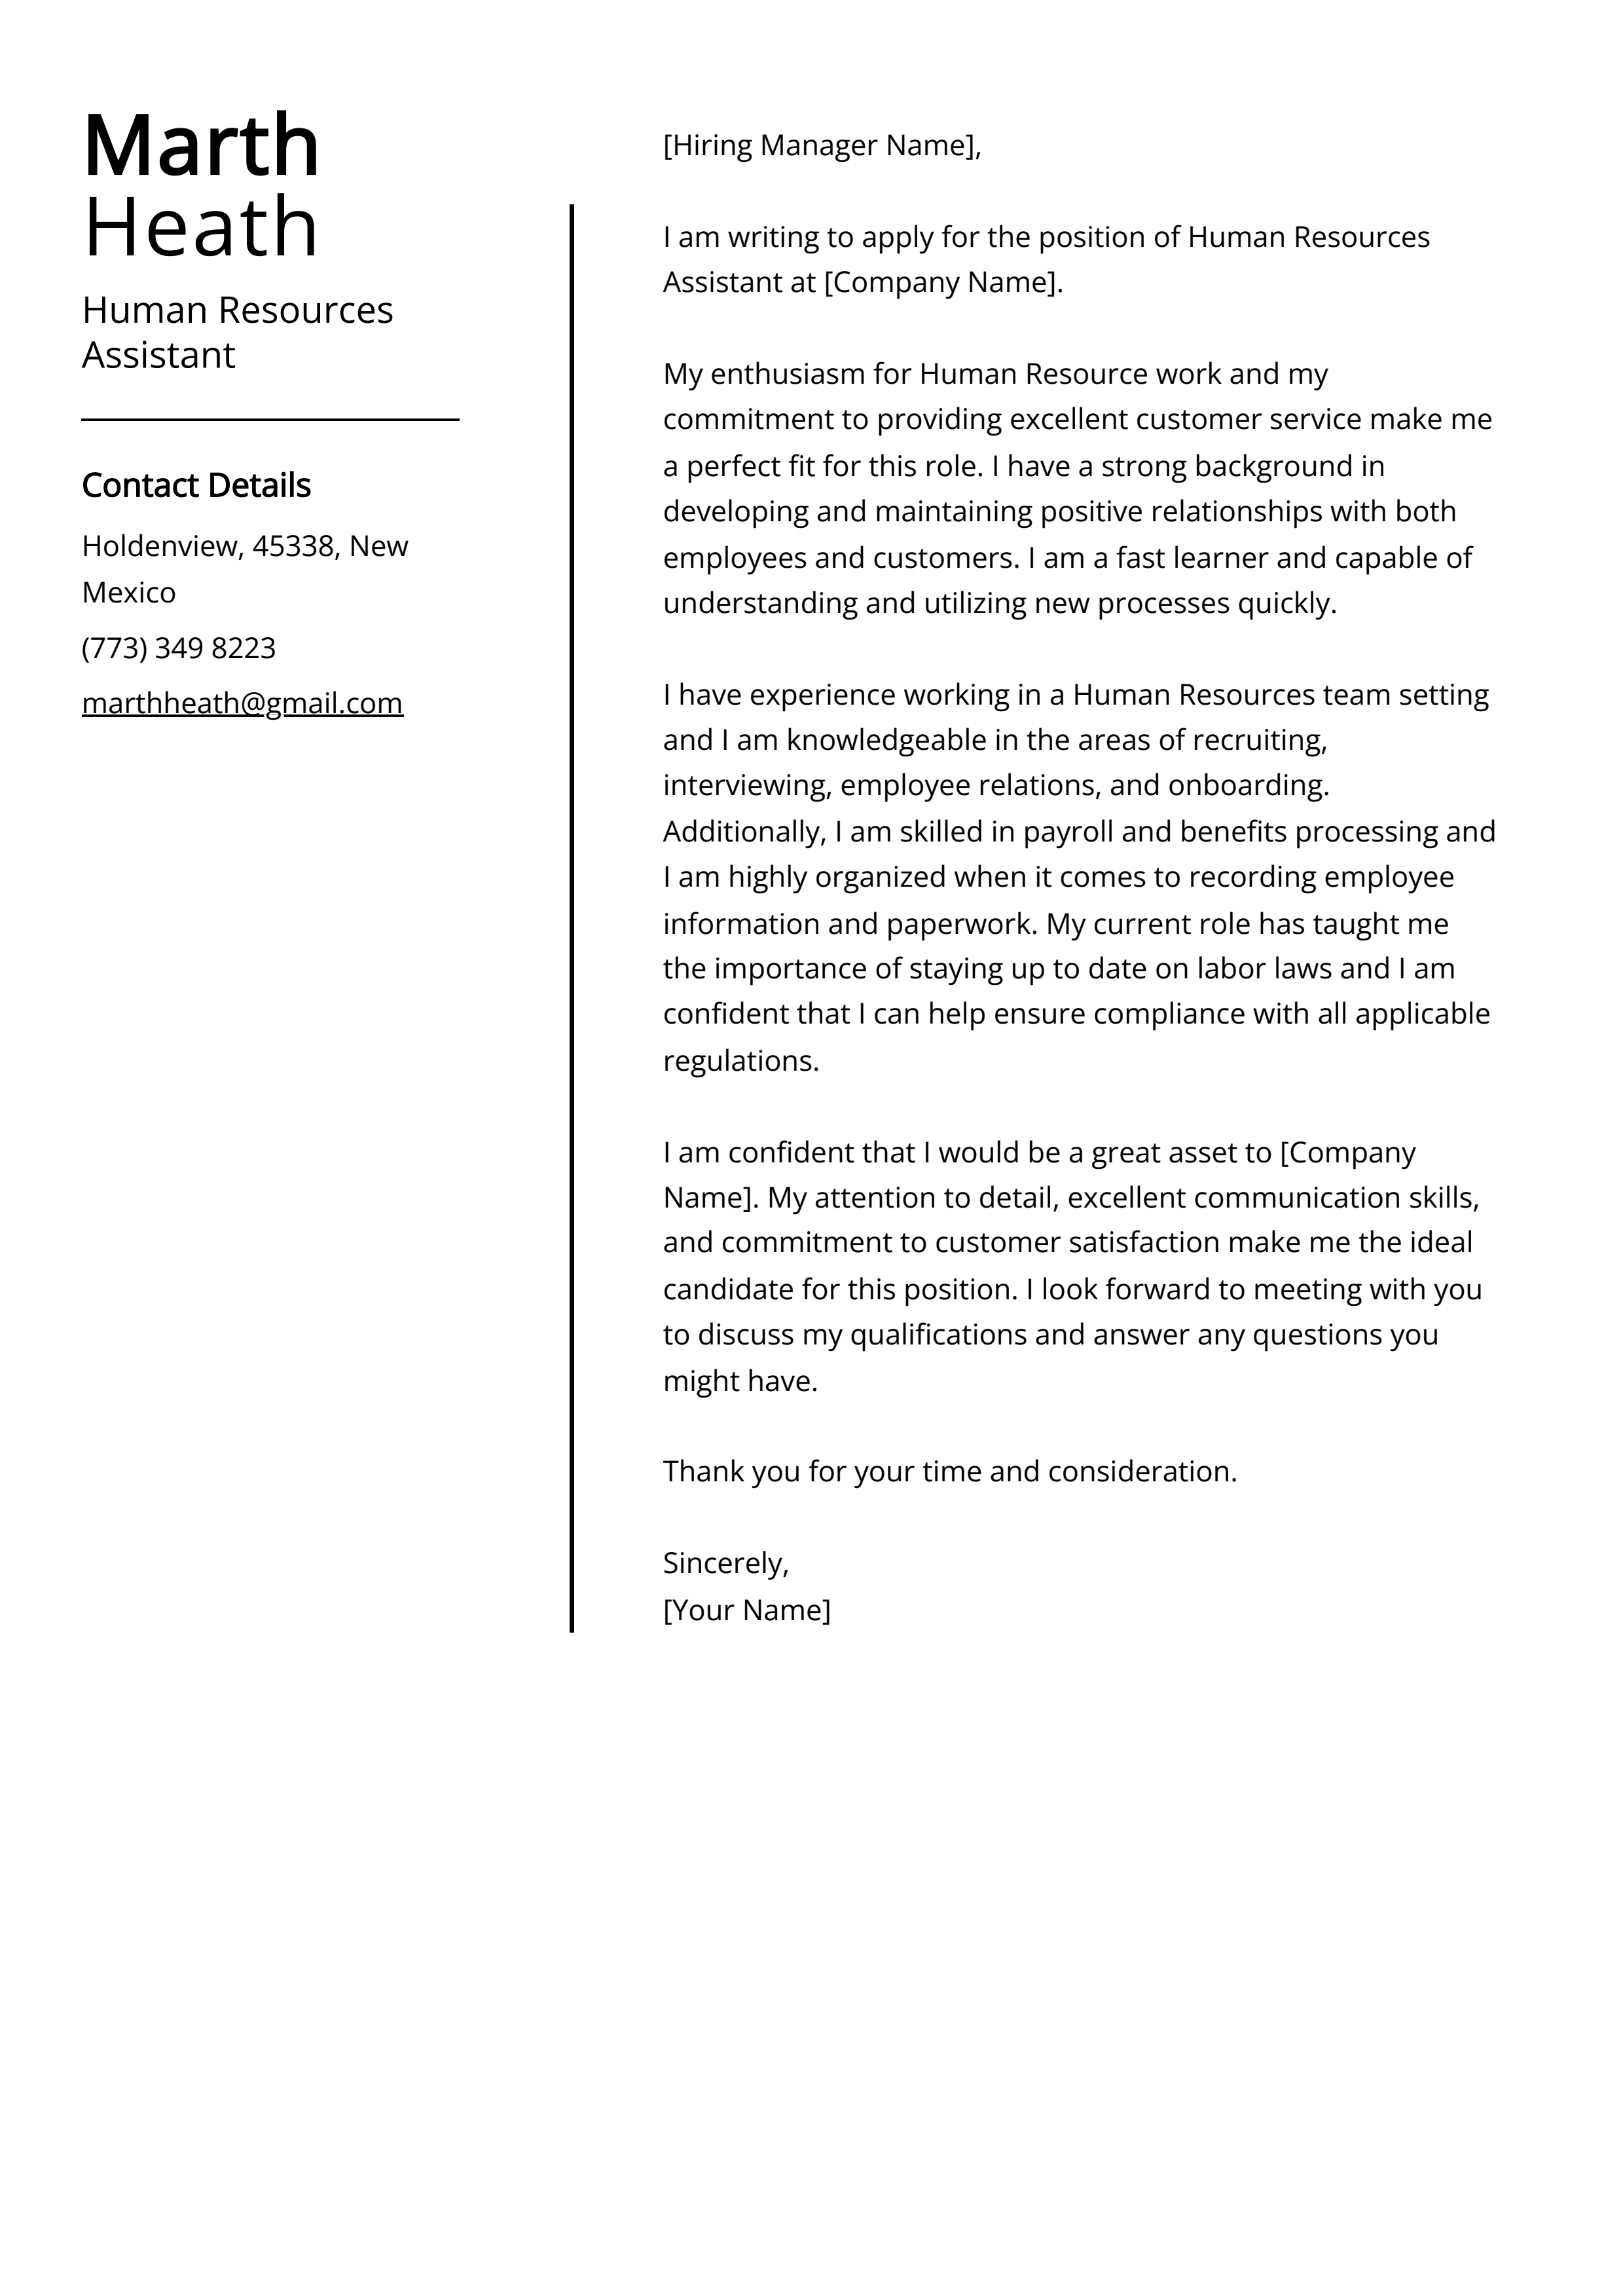 Human Resources Assistant Cover Letter Example